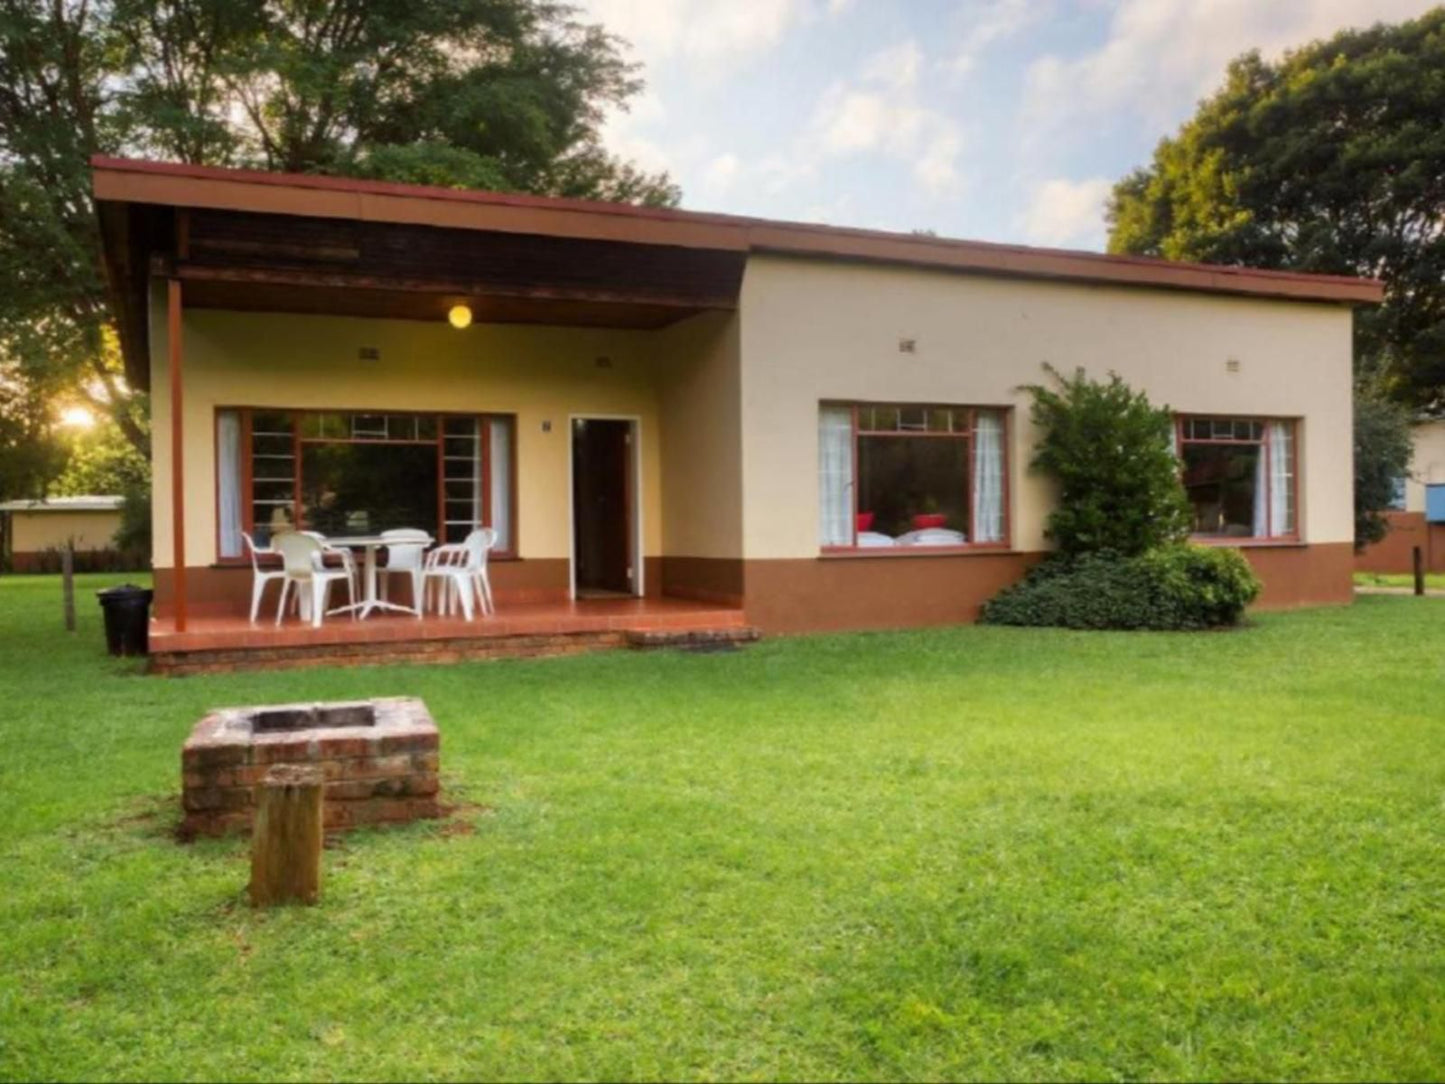 Merry Pebbles Resort Sabie Mpumalanga South Africa House, Building, Architecture